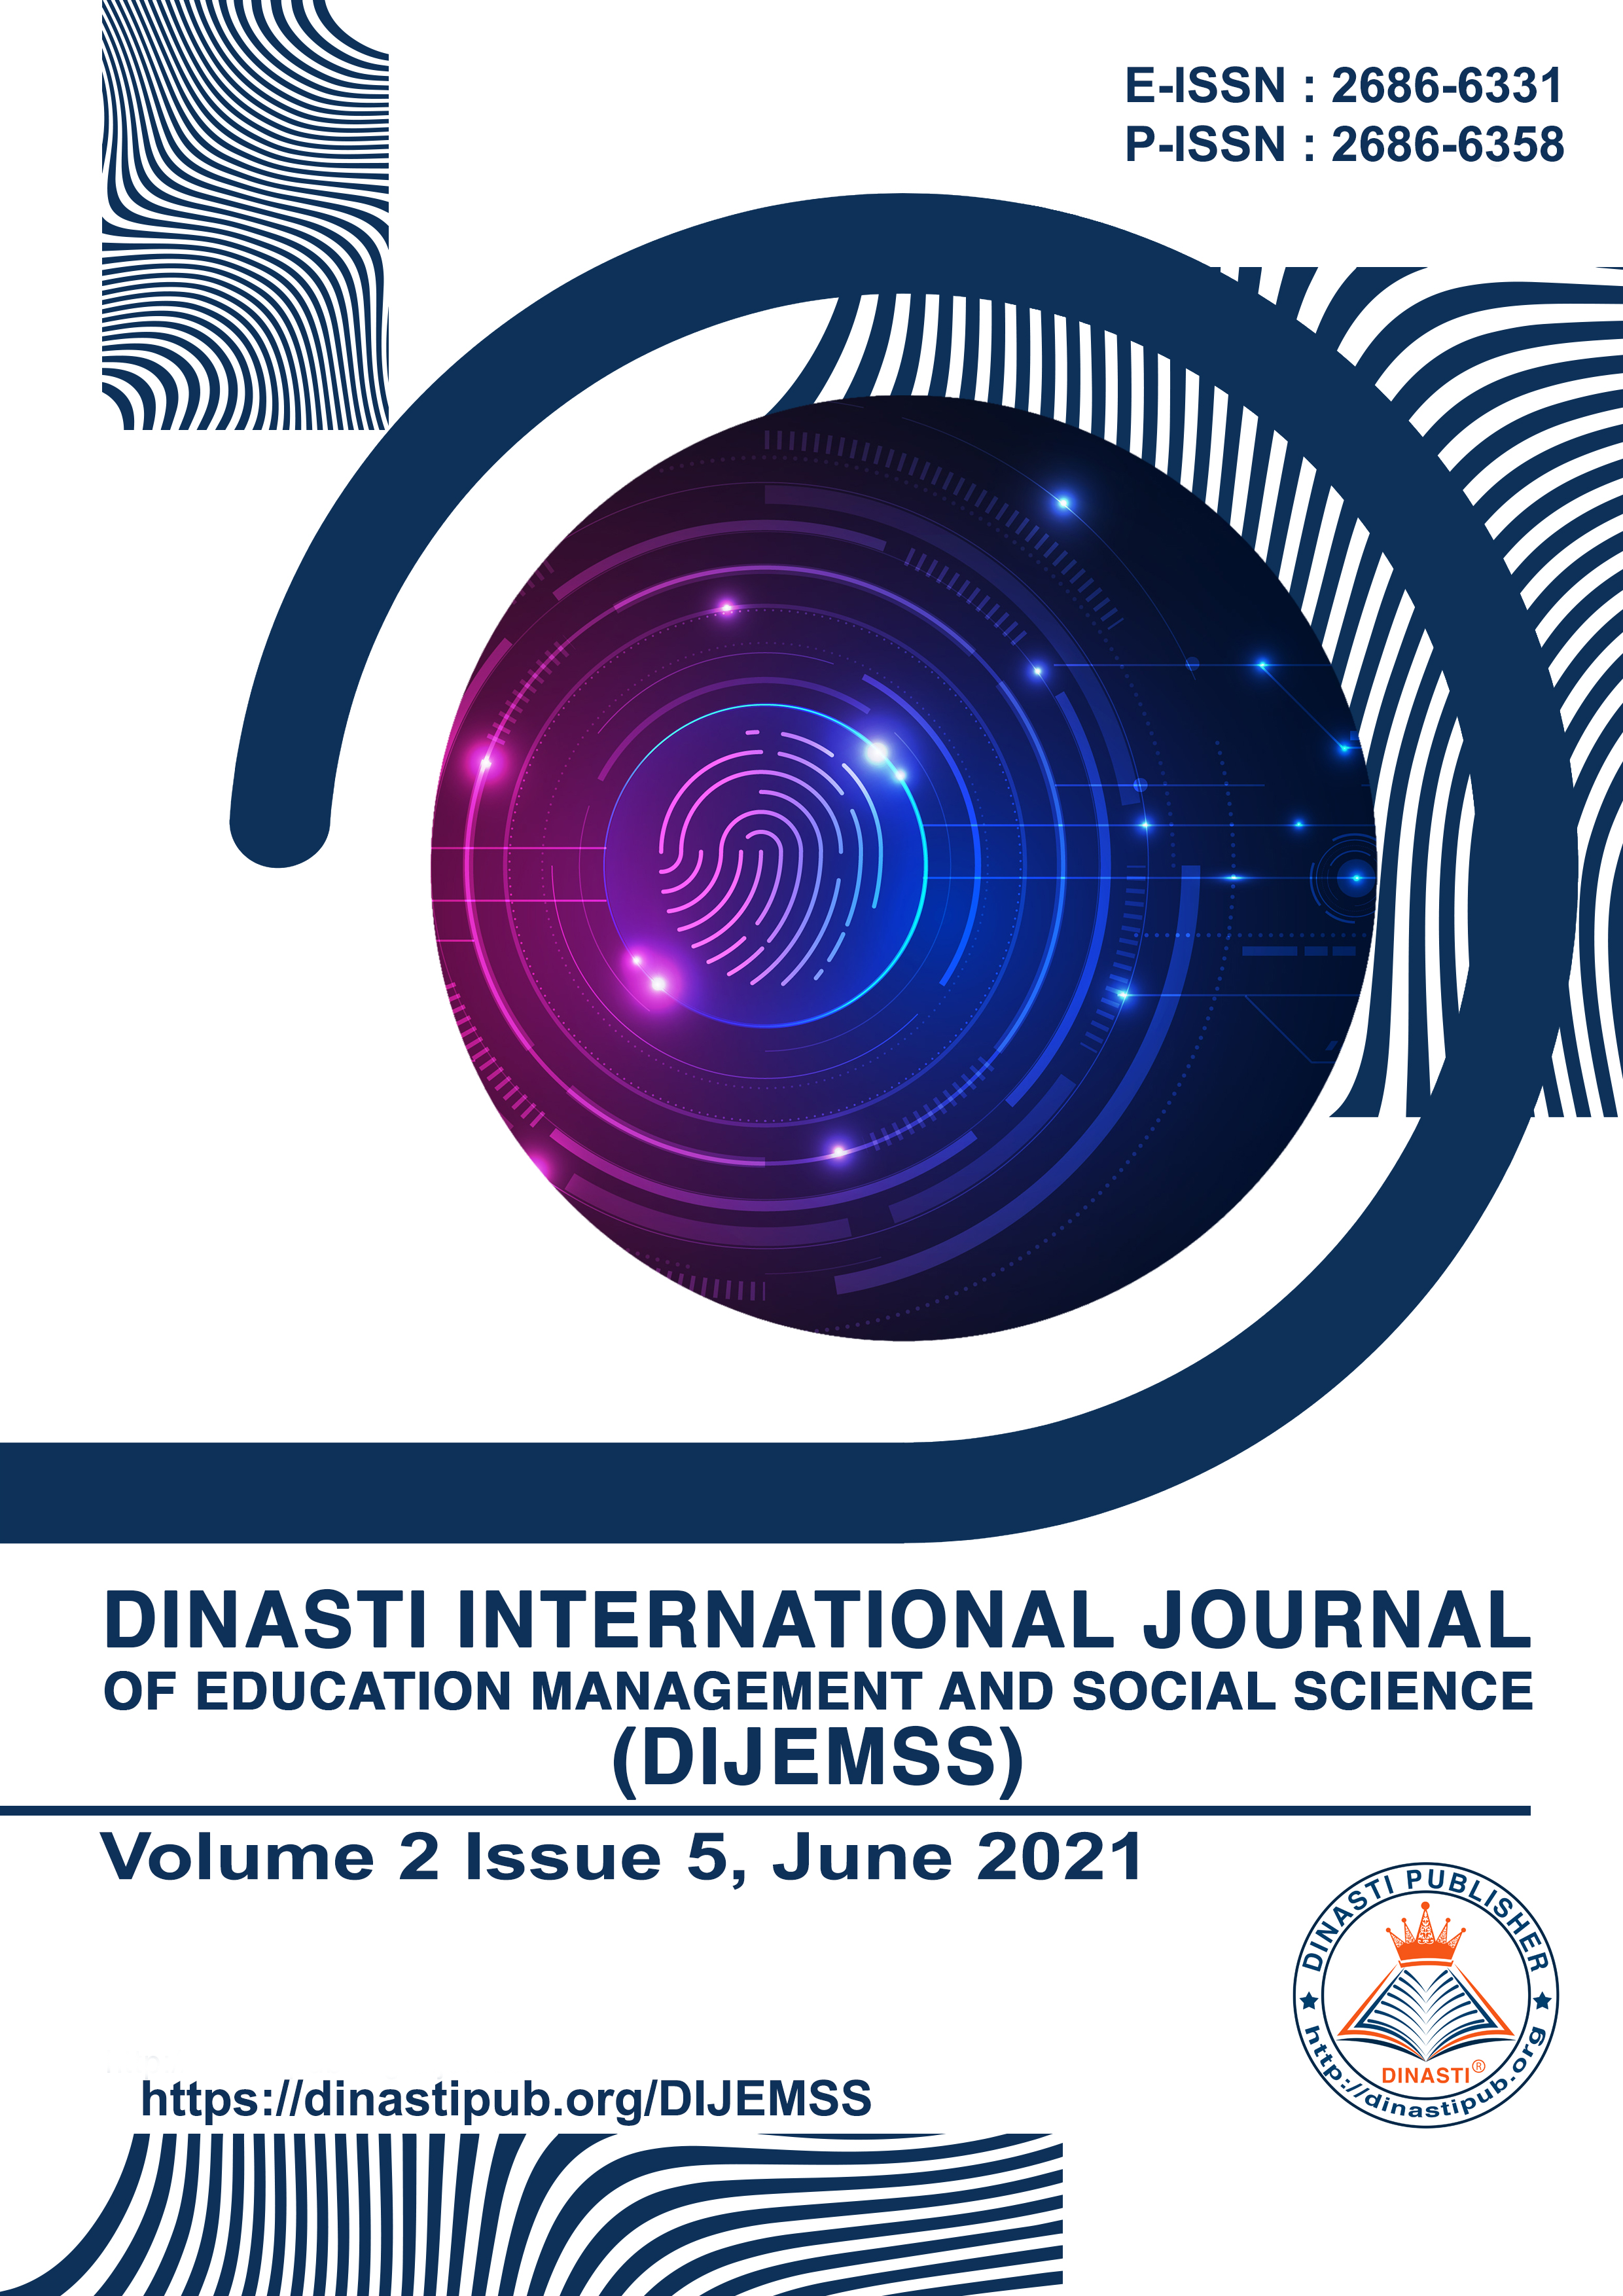 					View Vol. 2 No. 5 (2021): Dinasti International Journal of Education Management and Social Science (June - July 2021)
				